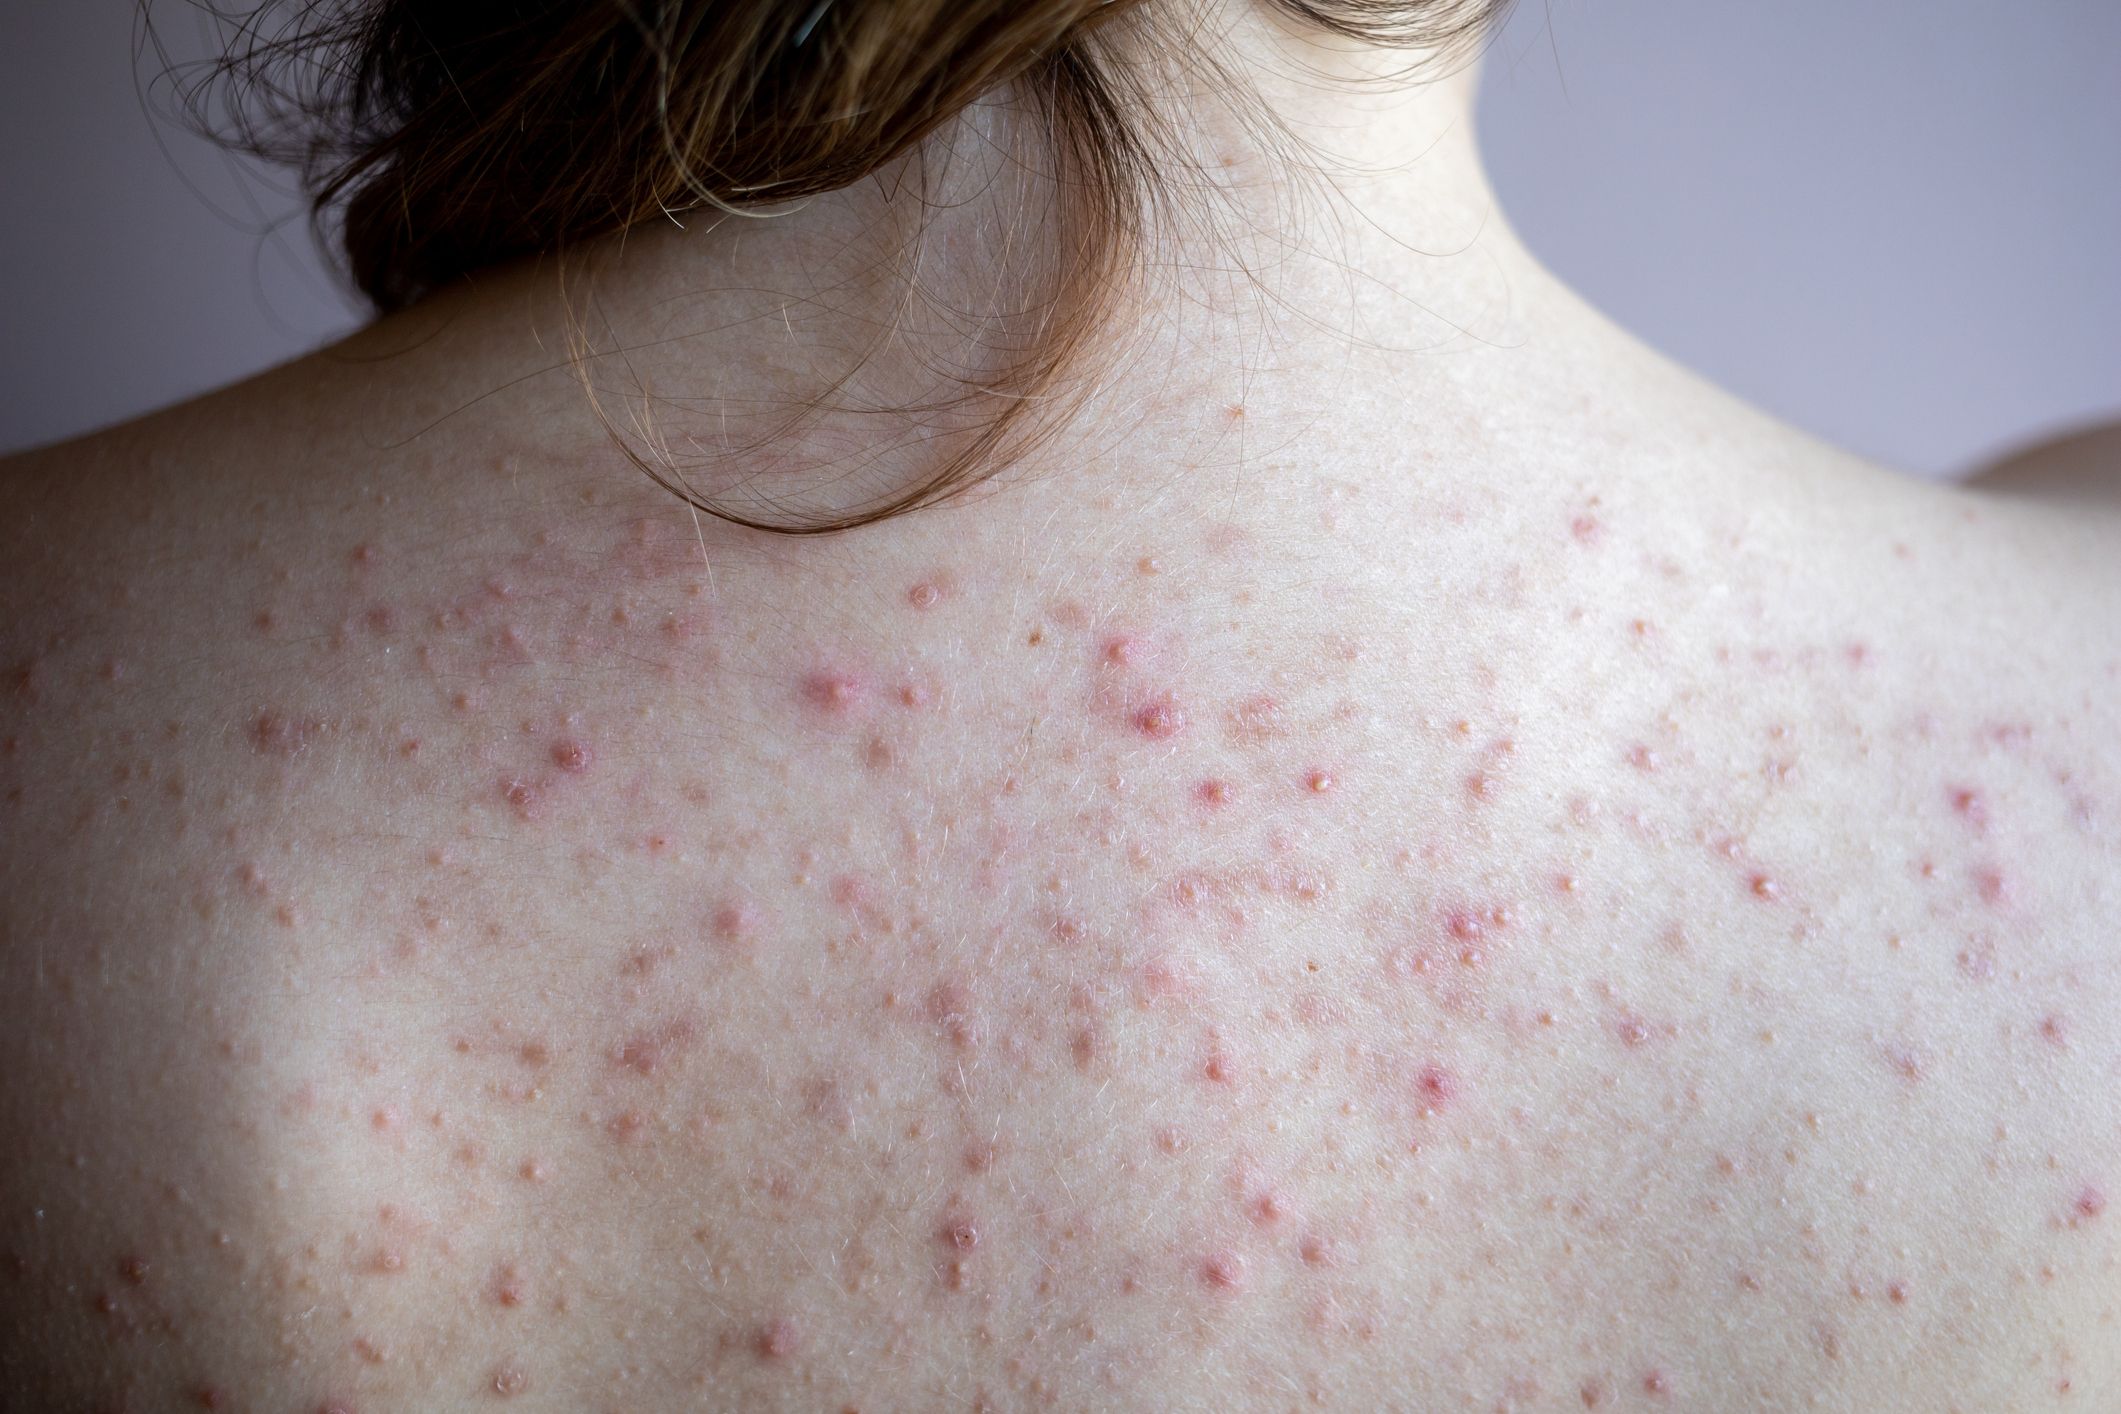 What Causes Red Spots on Skin? Dermatologists Explain